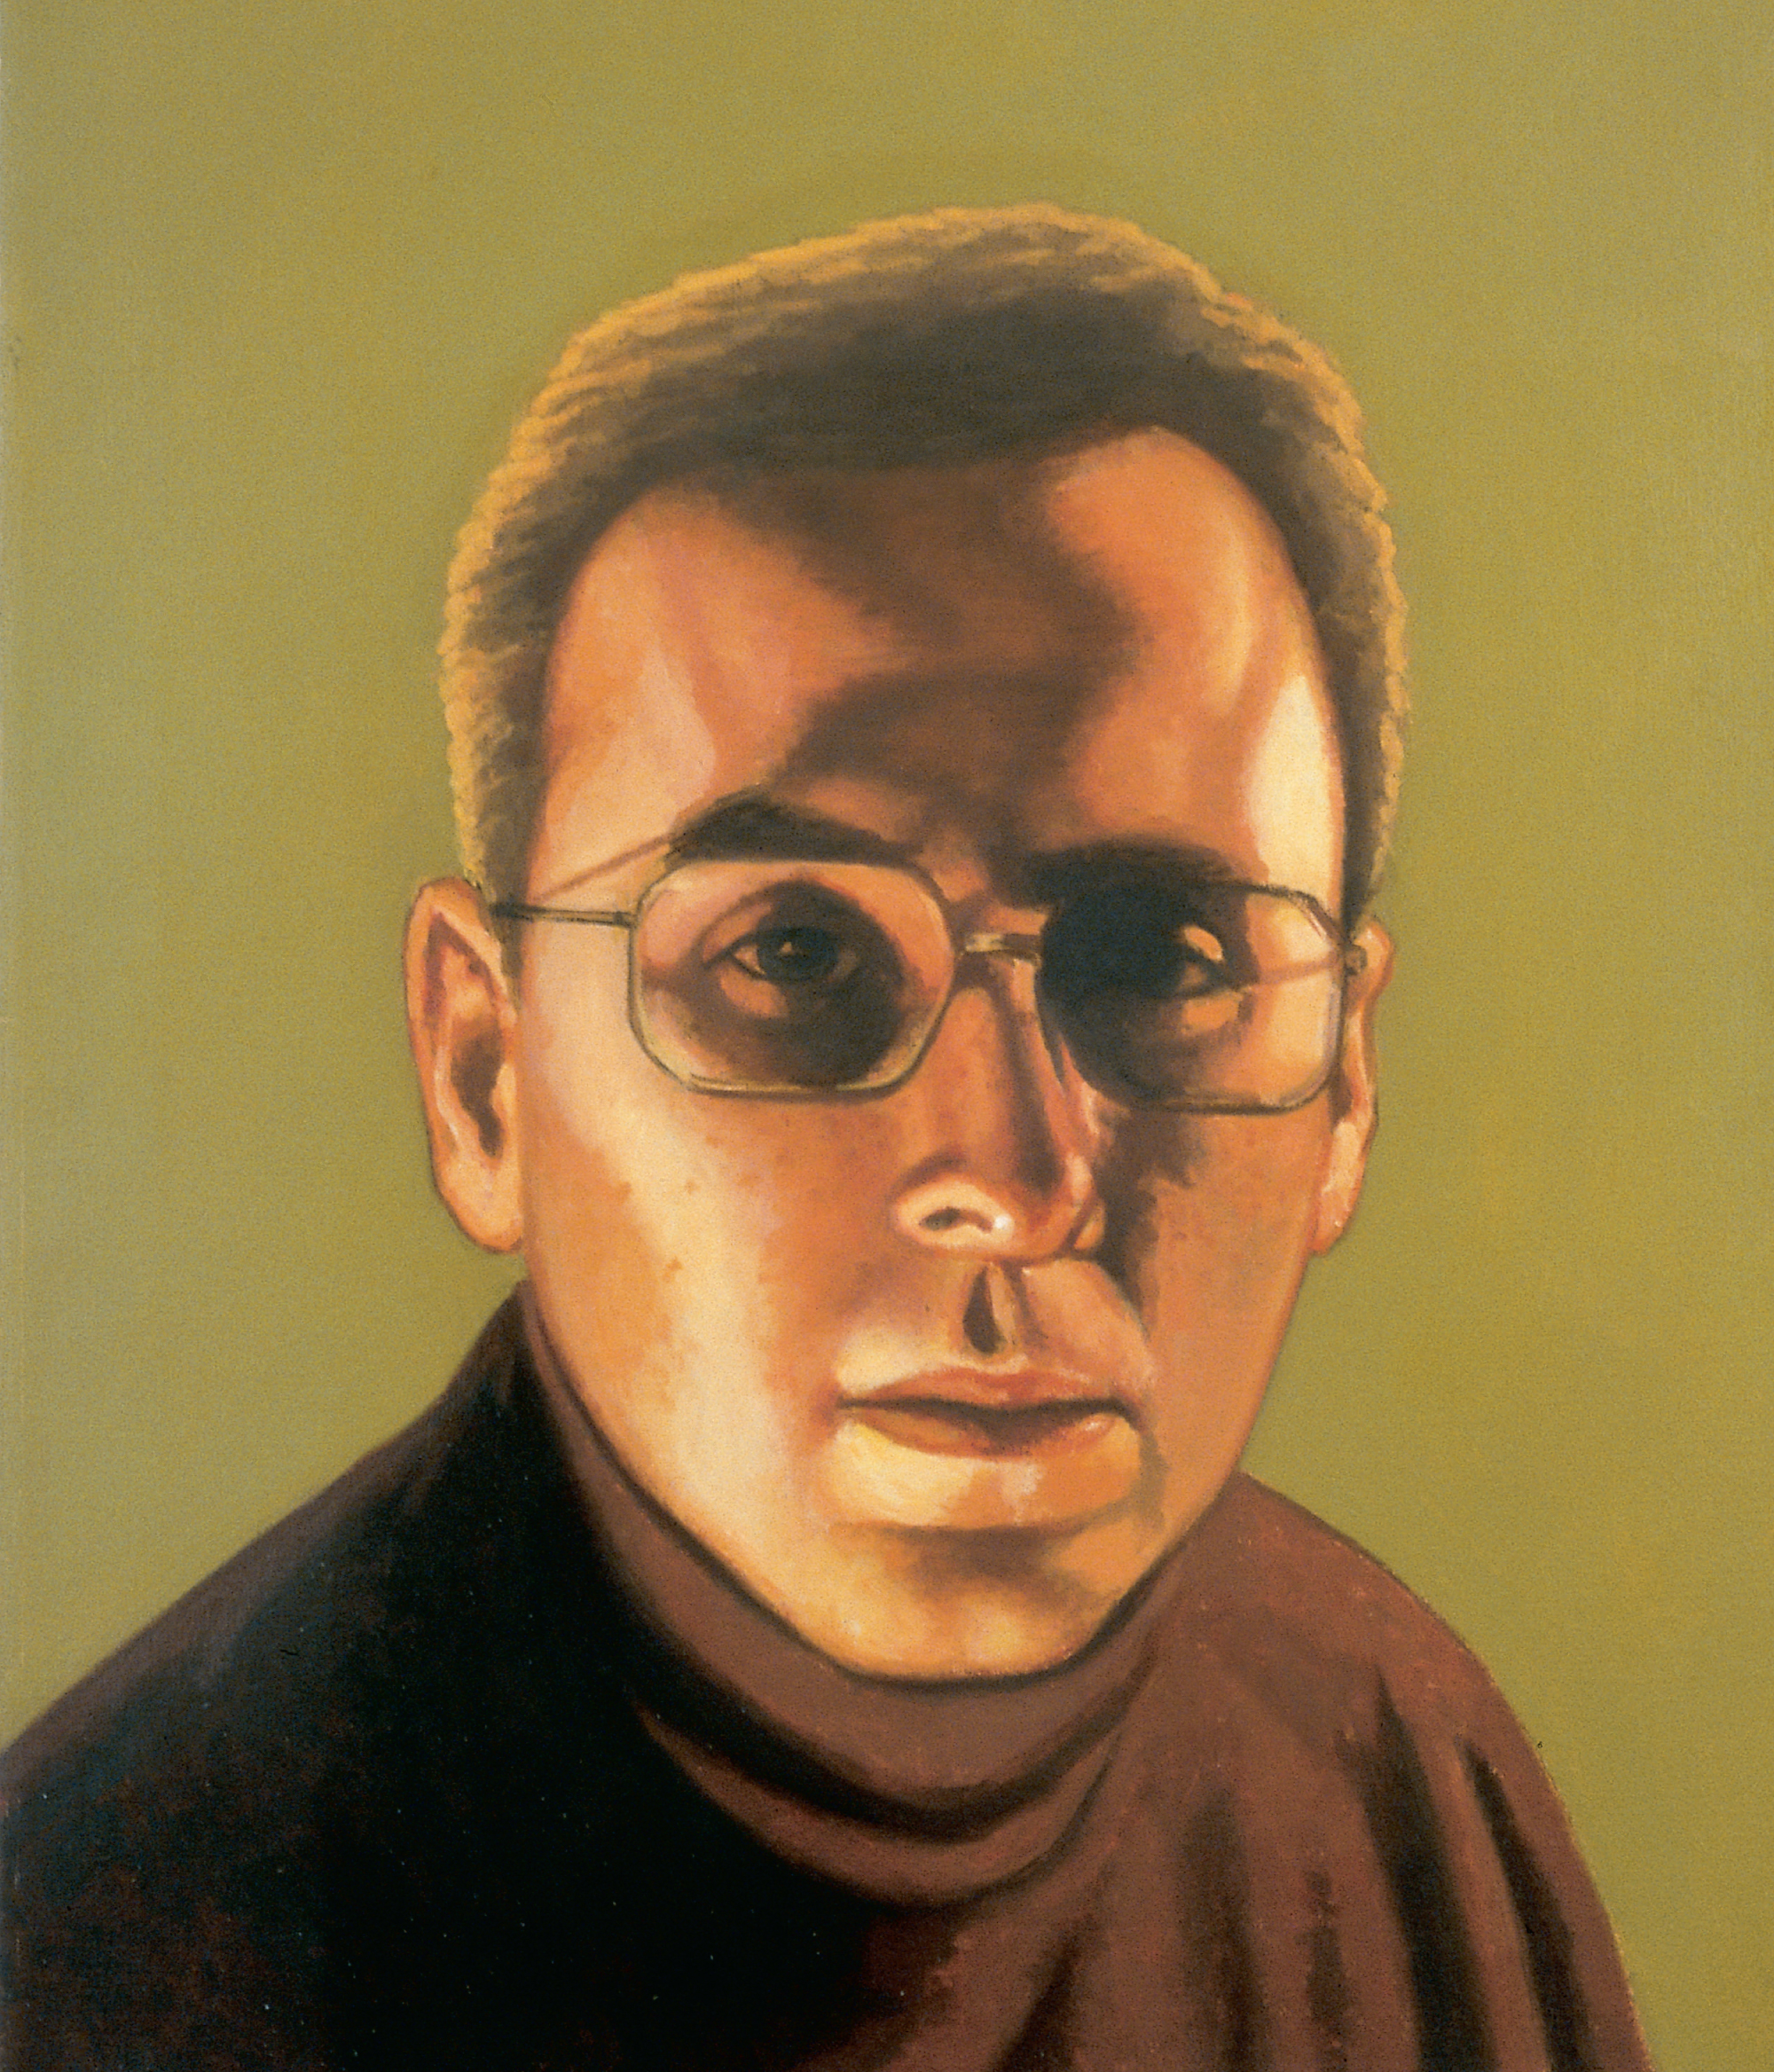 A 2001 painting by Peter Rostovsky entitled “I work for a government agency. I work hard; can’t tell you that much. I’m slim and muscular. I run. I read lots. Sandy hair, freckles. Team player. Tennis champ. Blue eyes. I pack a small .38. It’s personal. I write long reports into the night, and now must wear glasses.”